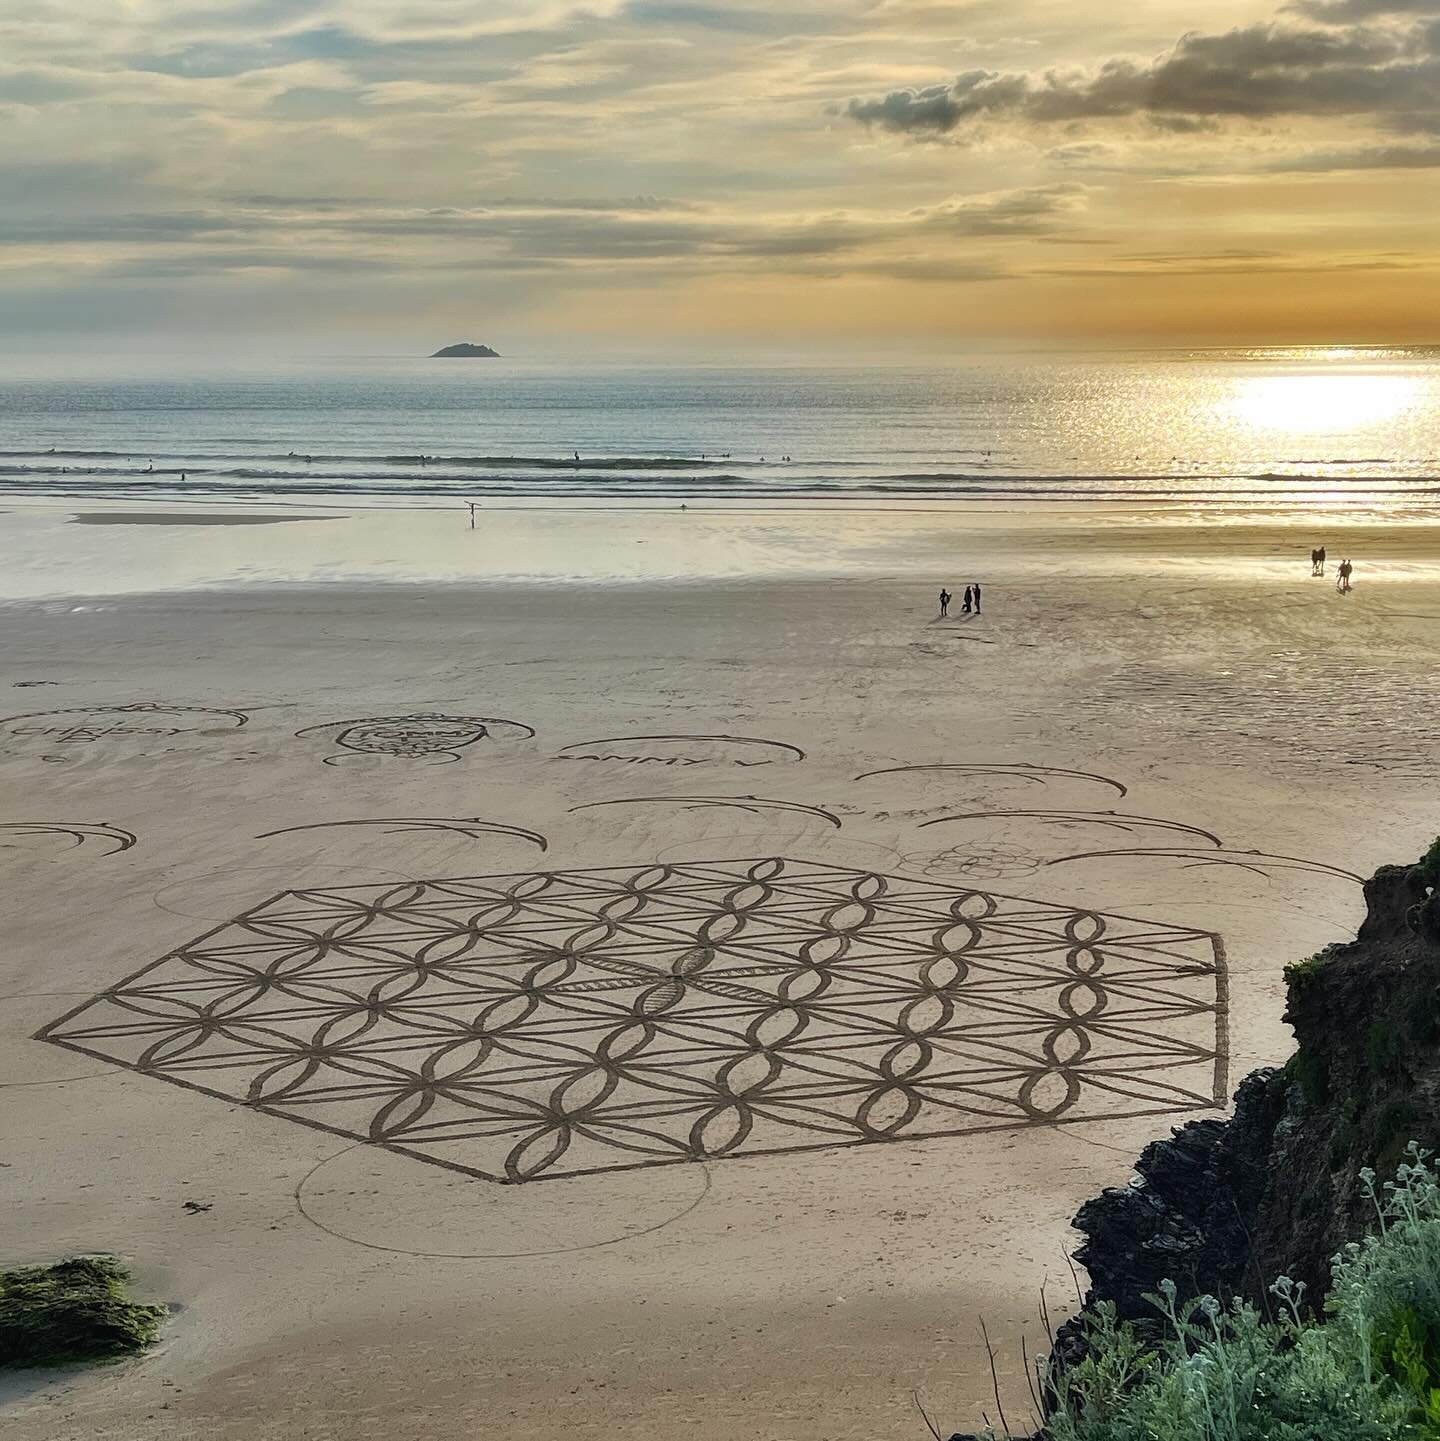 One of the highlights of the trip for me! Making sacred geometry beach art with @billys_beachart at the beautiful New Polzeath beach, below where Carl Jung stayed when he visited in 1923. If you visit @billys_beachart you&rsquo;ll see photos of Jung 